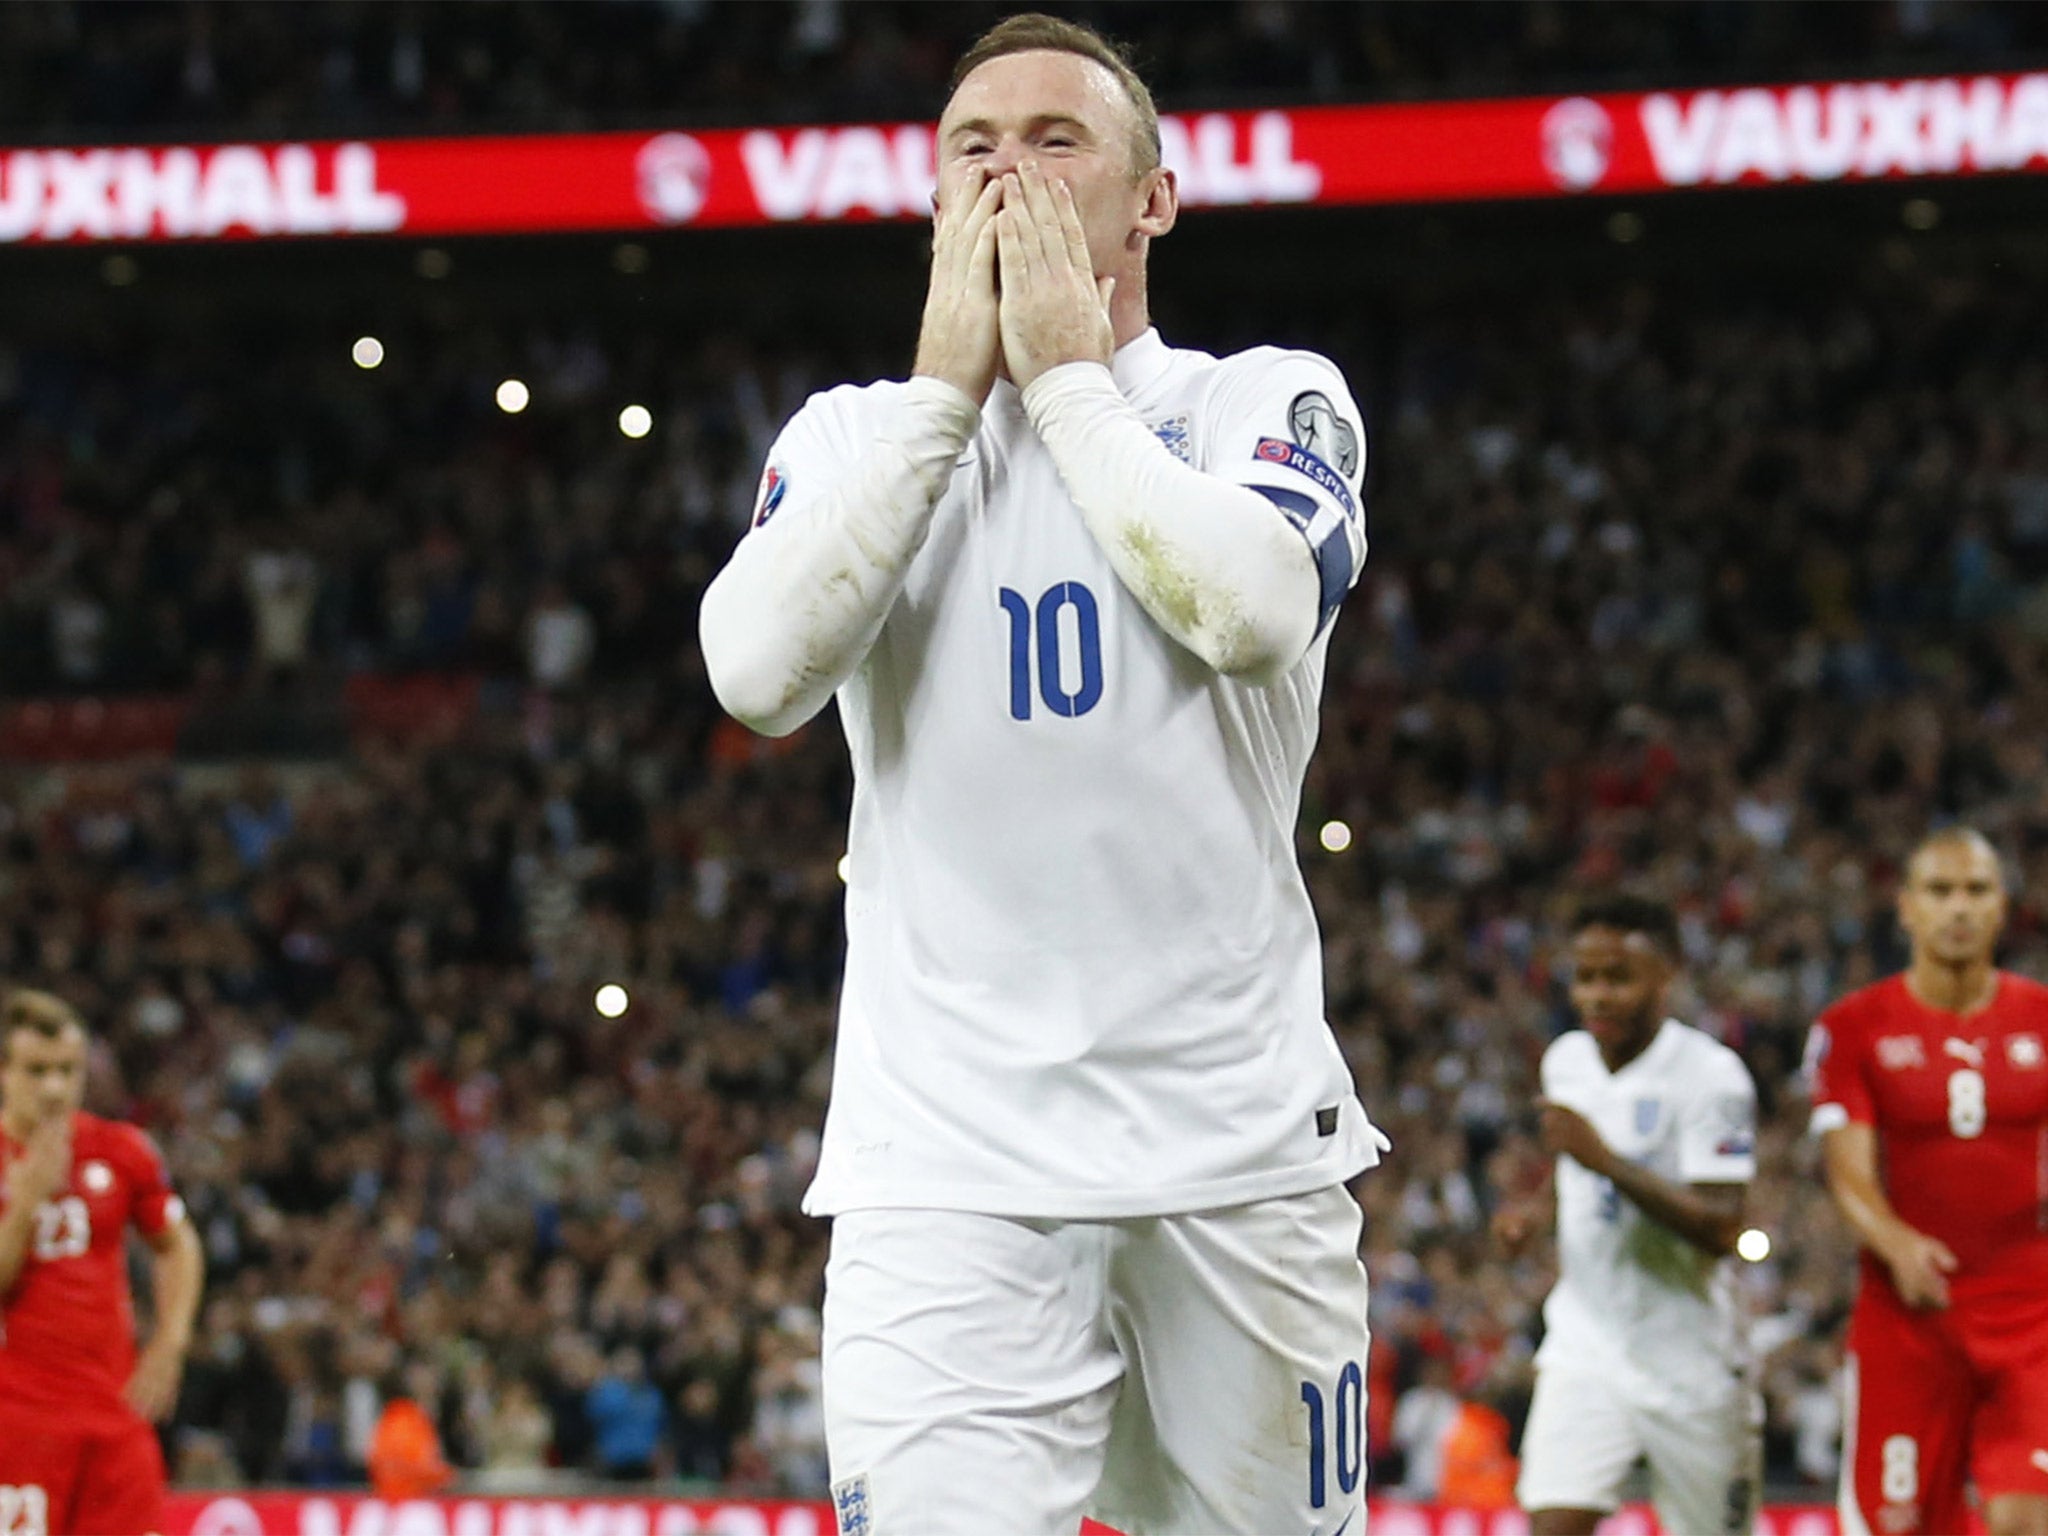 An emotional Wayne Rooney after breaking the record